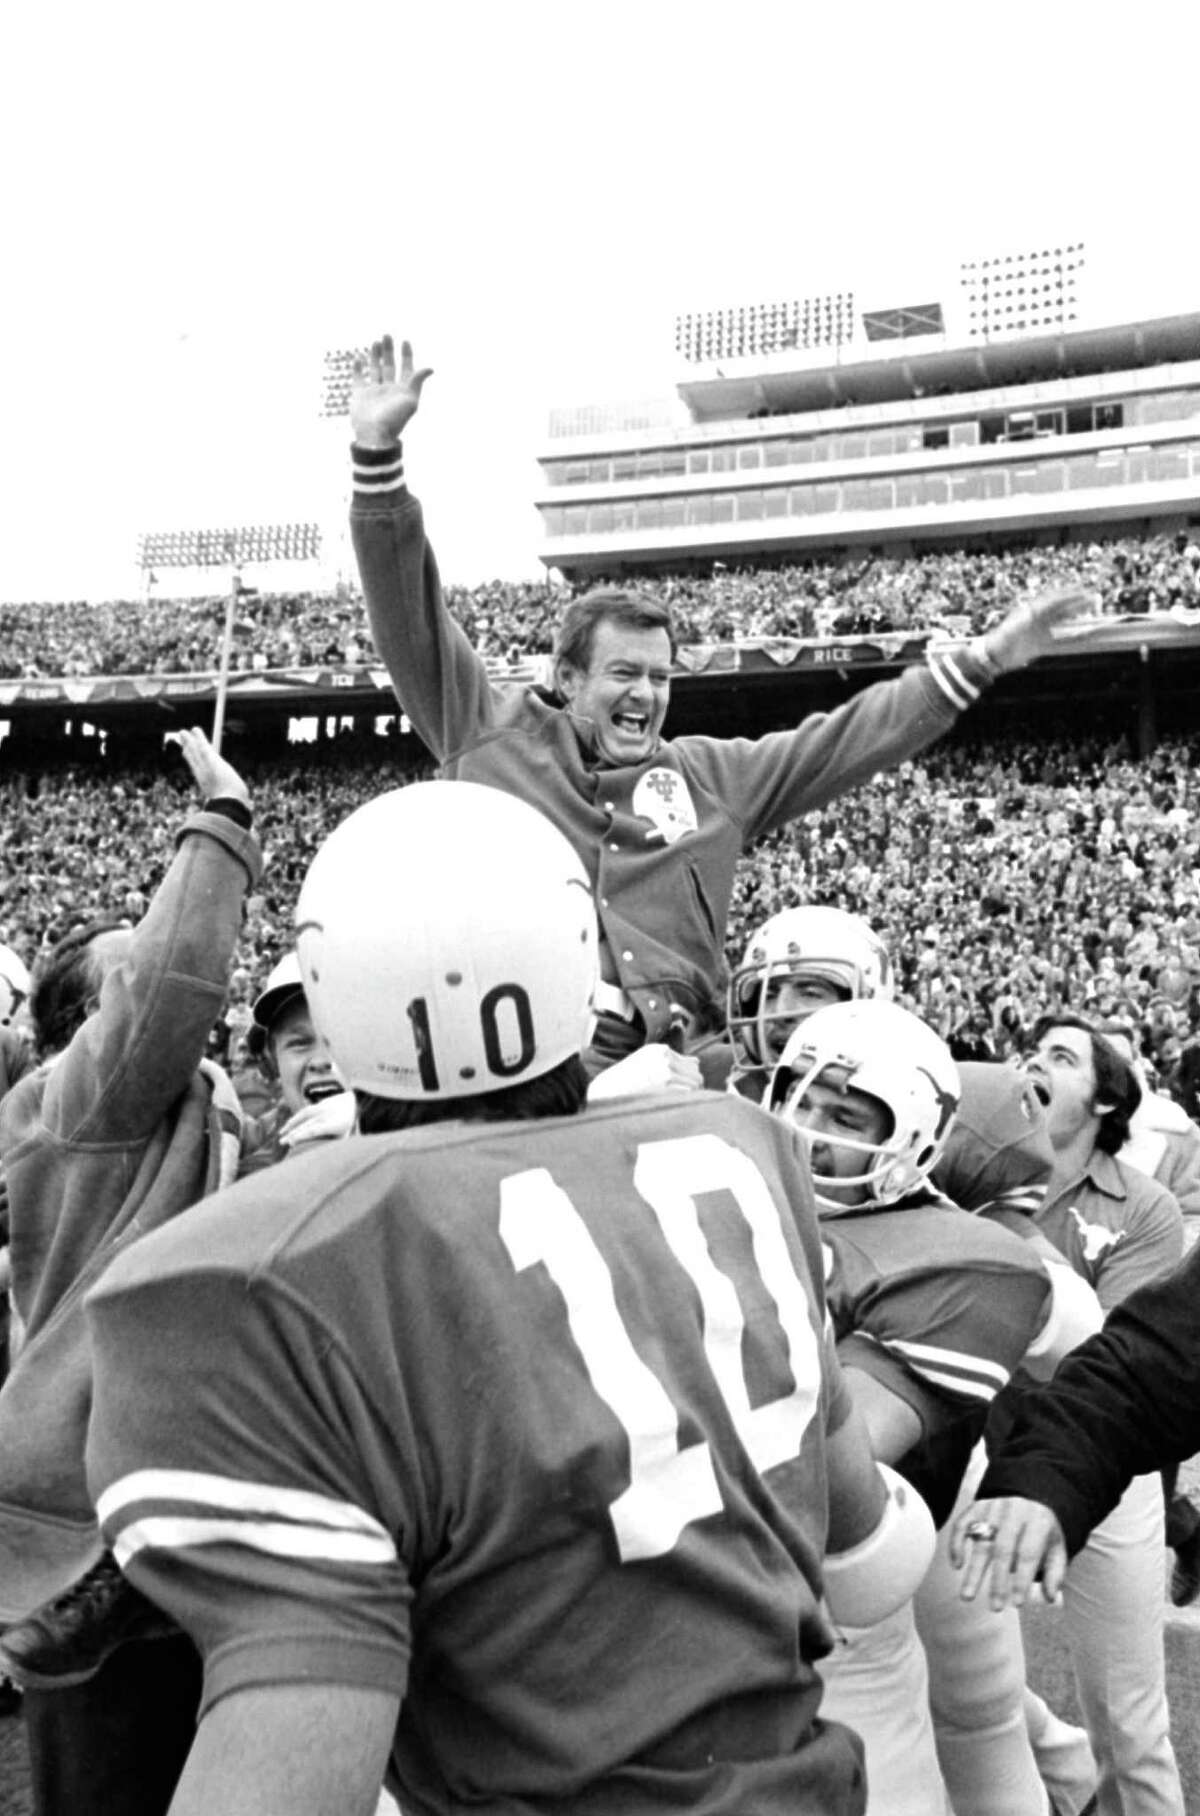 FILE - This Jan. 1, 1973 file photo shows Texas coach Darrell Royal being carried off the field by his players after the Longhorns defeated the University of Alabama, 17-13, in the Cotton bowl in Dallas, Tex. The University of Texas says former football coach Darrell Royal, who won two national championships and a share of a third, has died. He was 88. UT spokesman Nick Voinis on Wednesday, Nov. 7, 2012 confirmed Royal's death in Austin.(AP Photo/File)